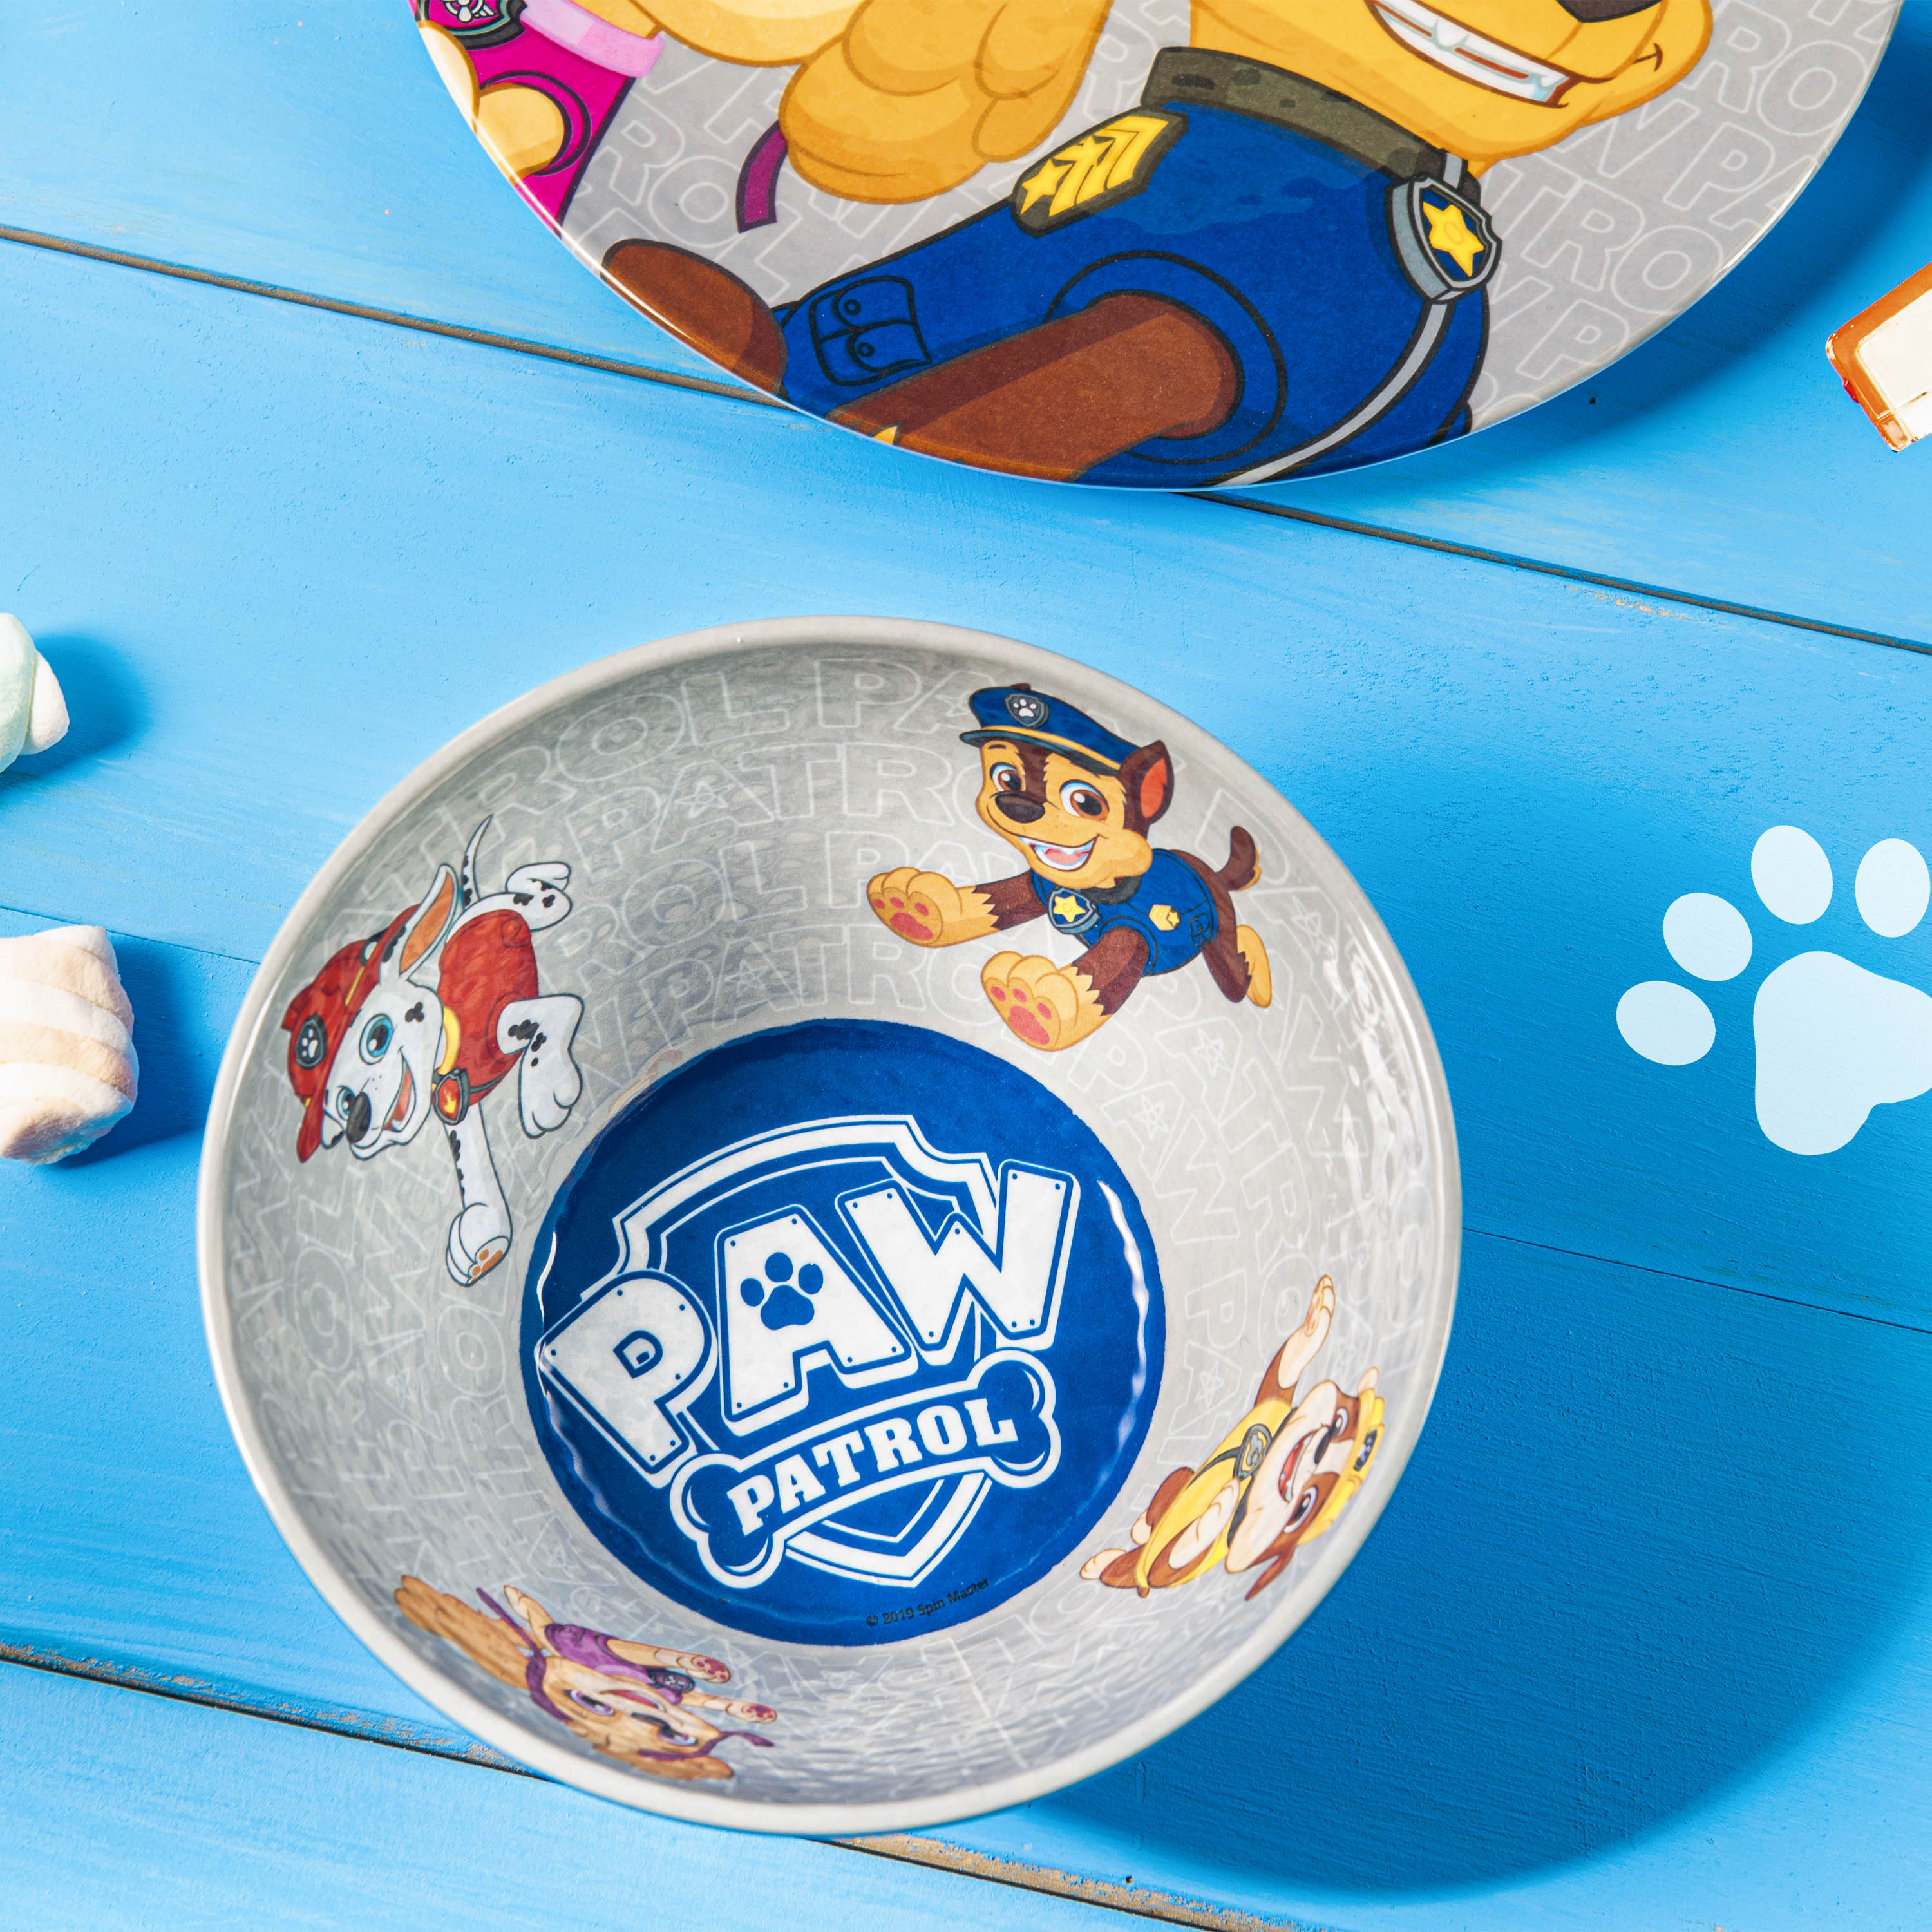 Paw patrol Kids 9-inch Plate and 6-inch Bowl Set, Chase, Skye and Friends, 2-piece set slideshow image 4